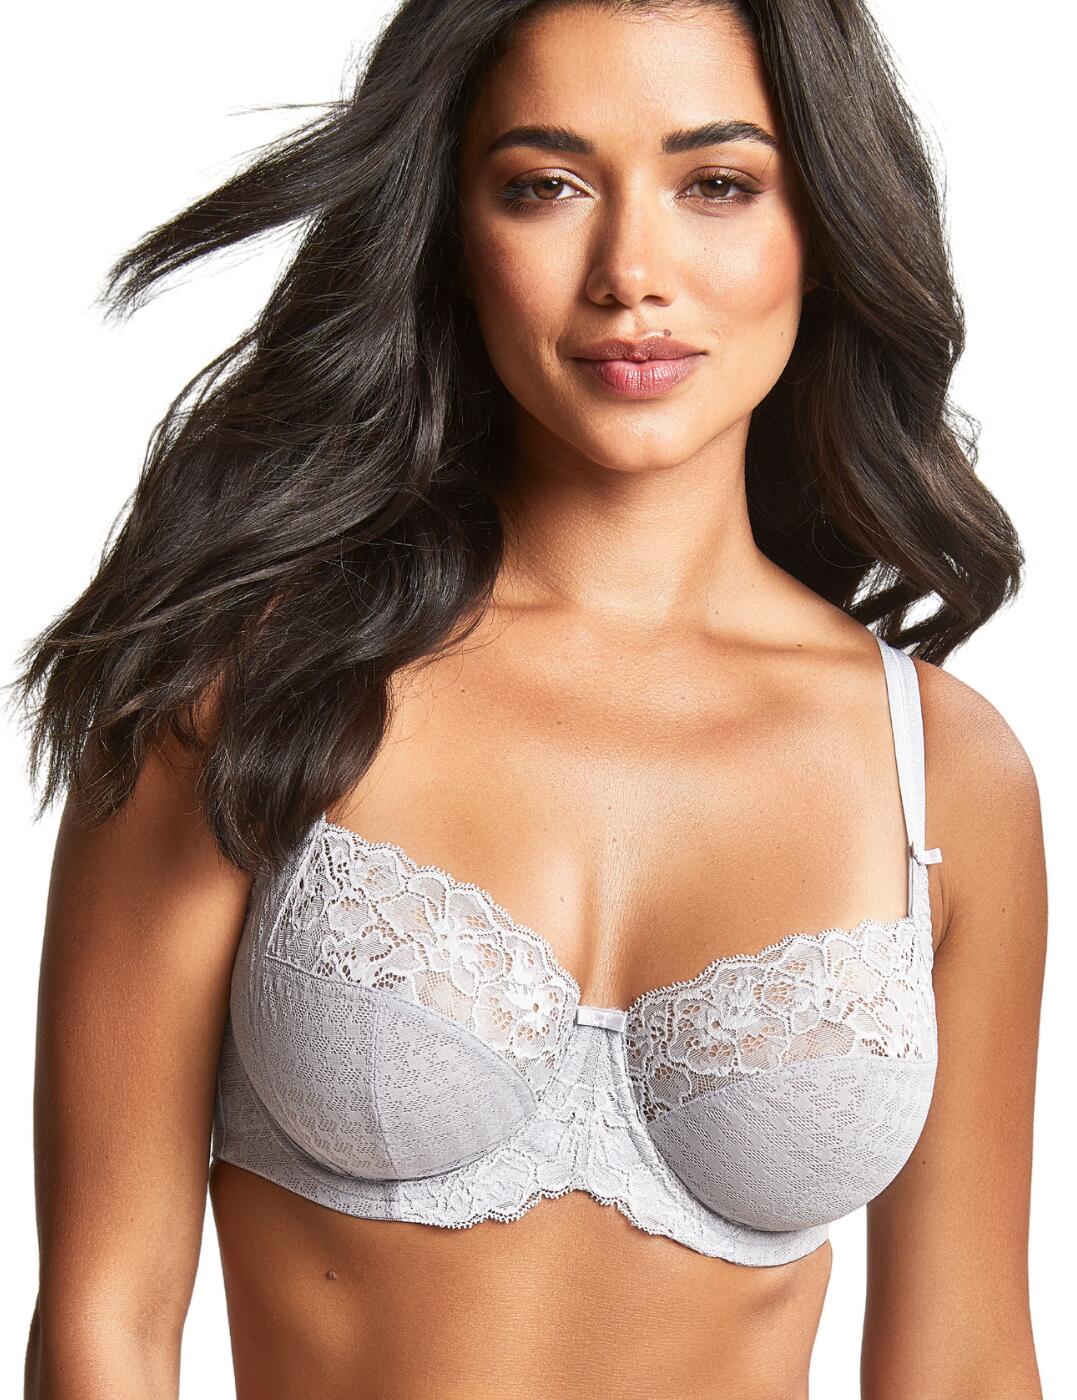 Panache Envy Full Cup Bra Underwired Non-Padded Ladies Lace Lingerie 7285